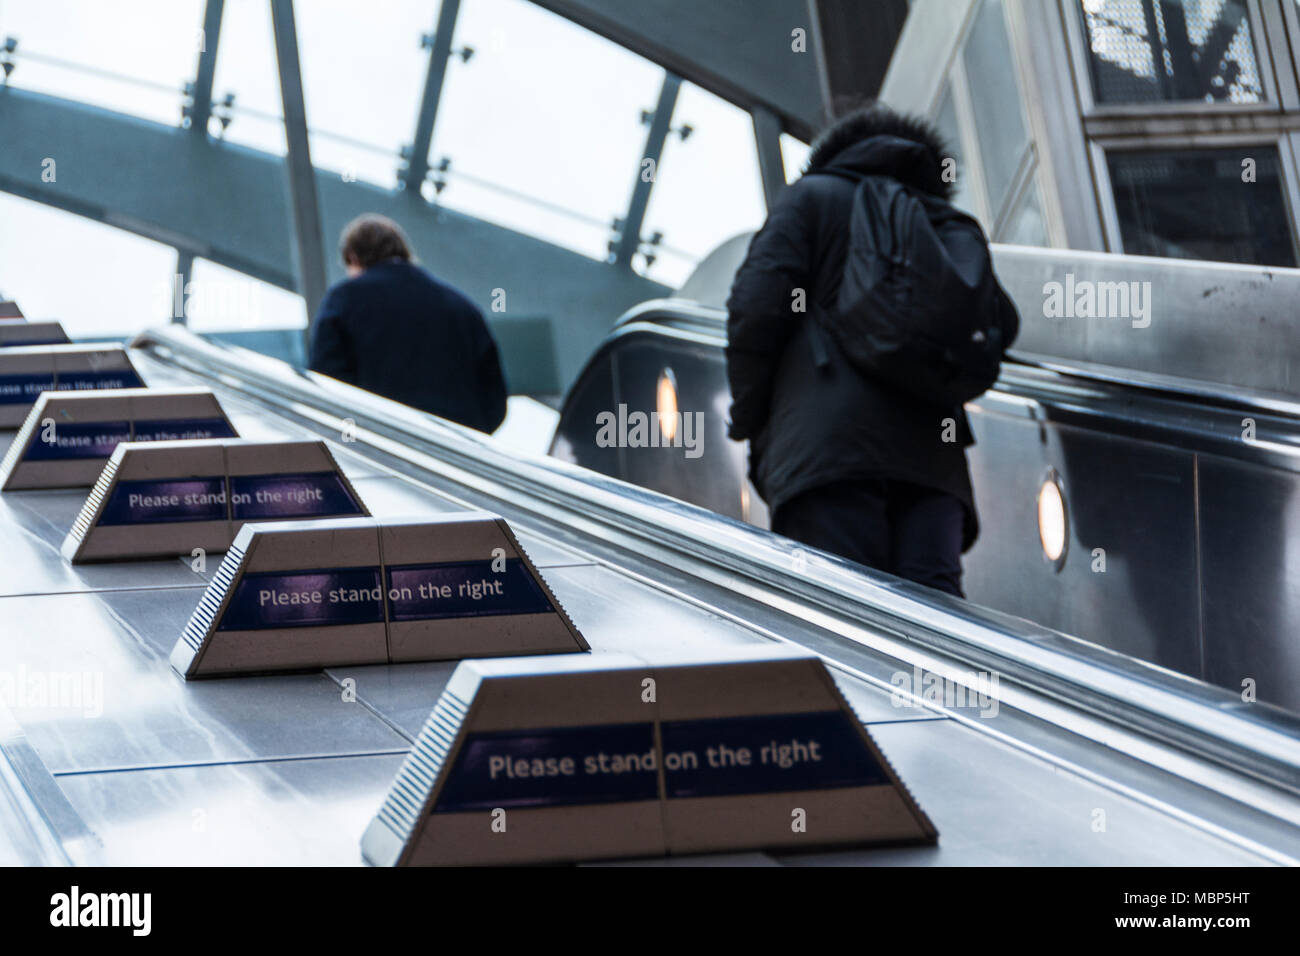 Please Stand on the Right signs on Transport for London escalators at Canary Wharf station, London, UK Stock Photo